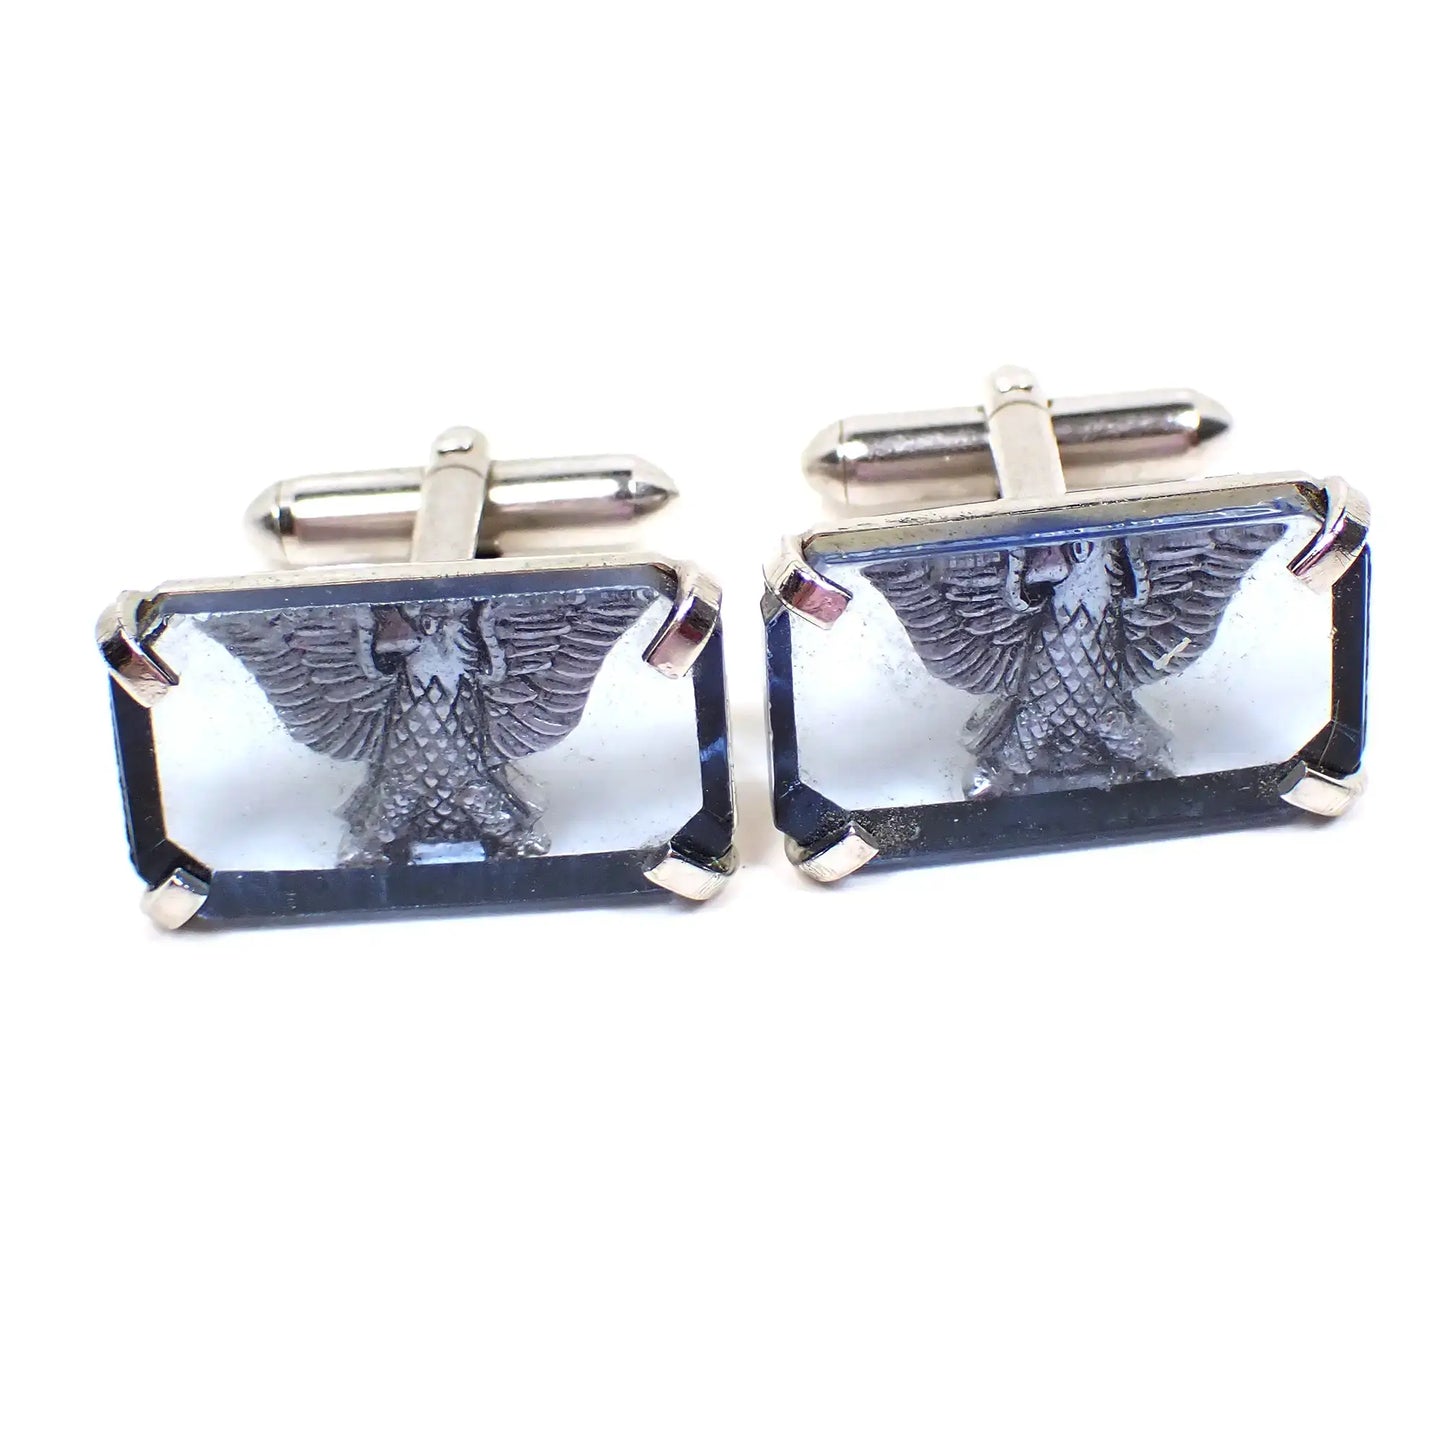 Swank Retro Vintage Eagle Cufflinks, Blue Glass and Silver Tone Rectangle Cuff Links, Patriotic Animal Jewelry